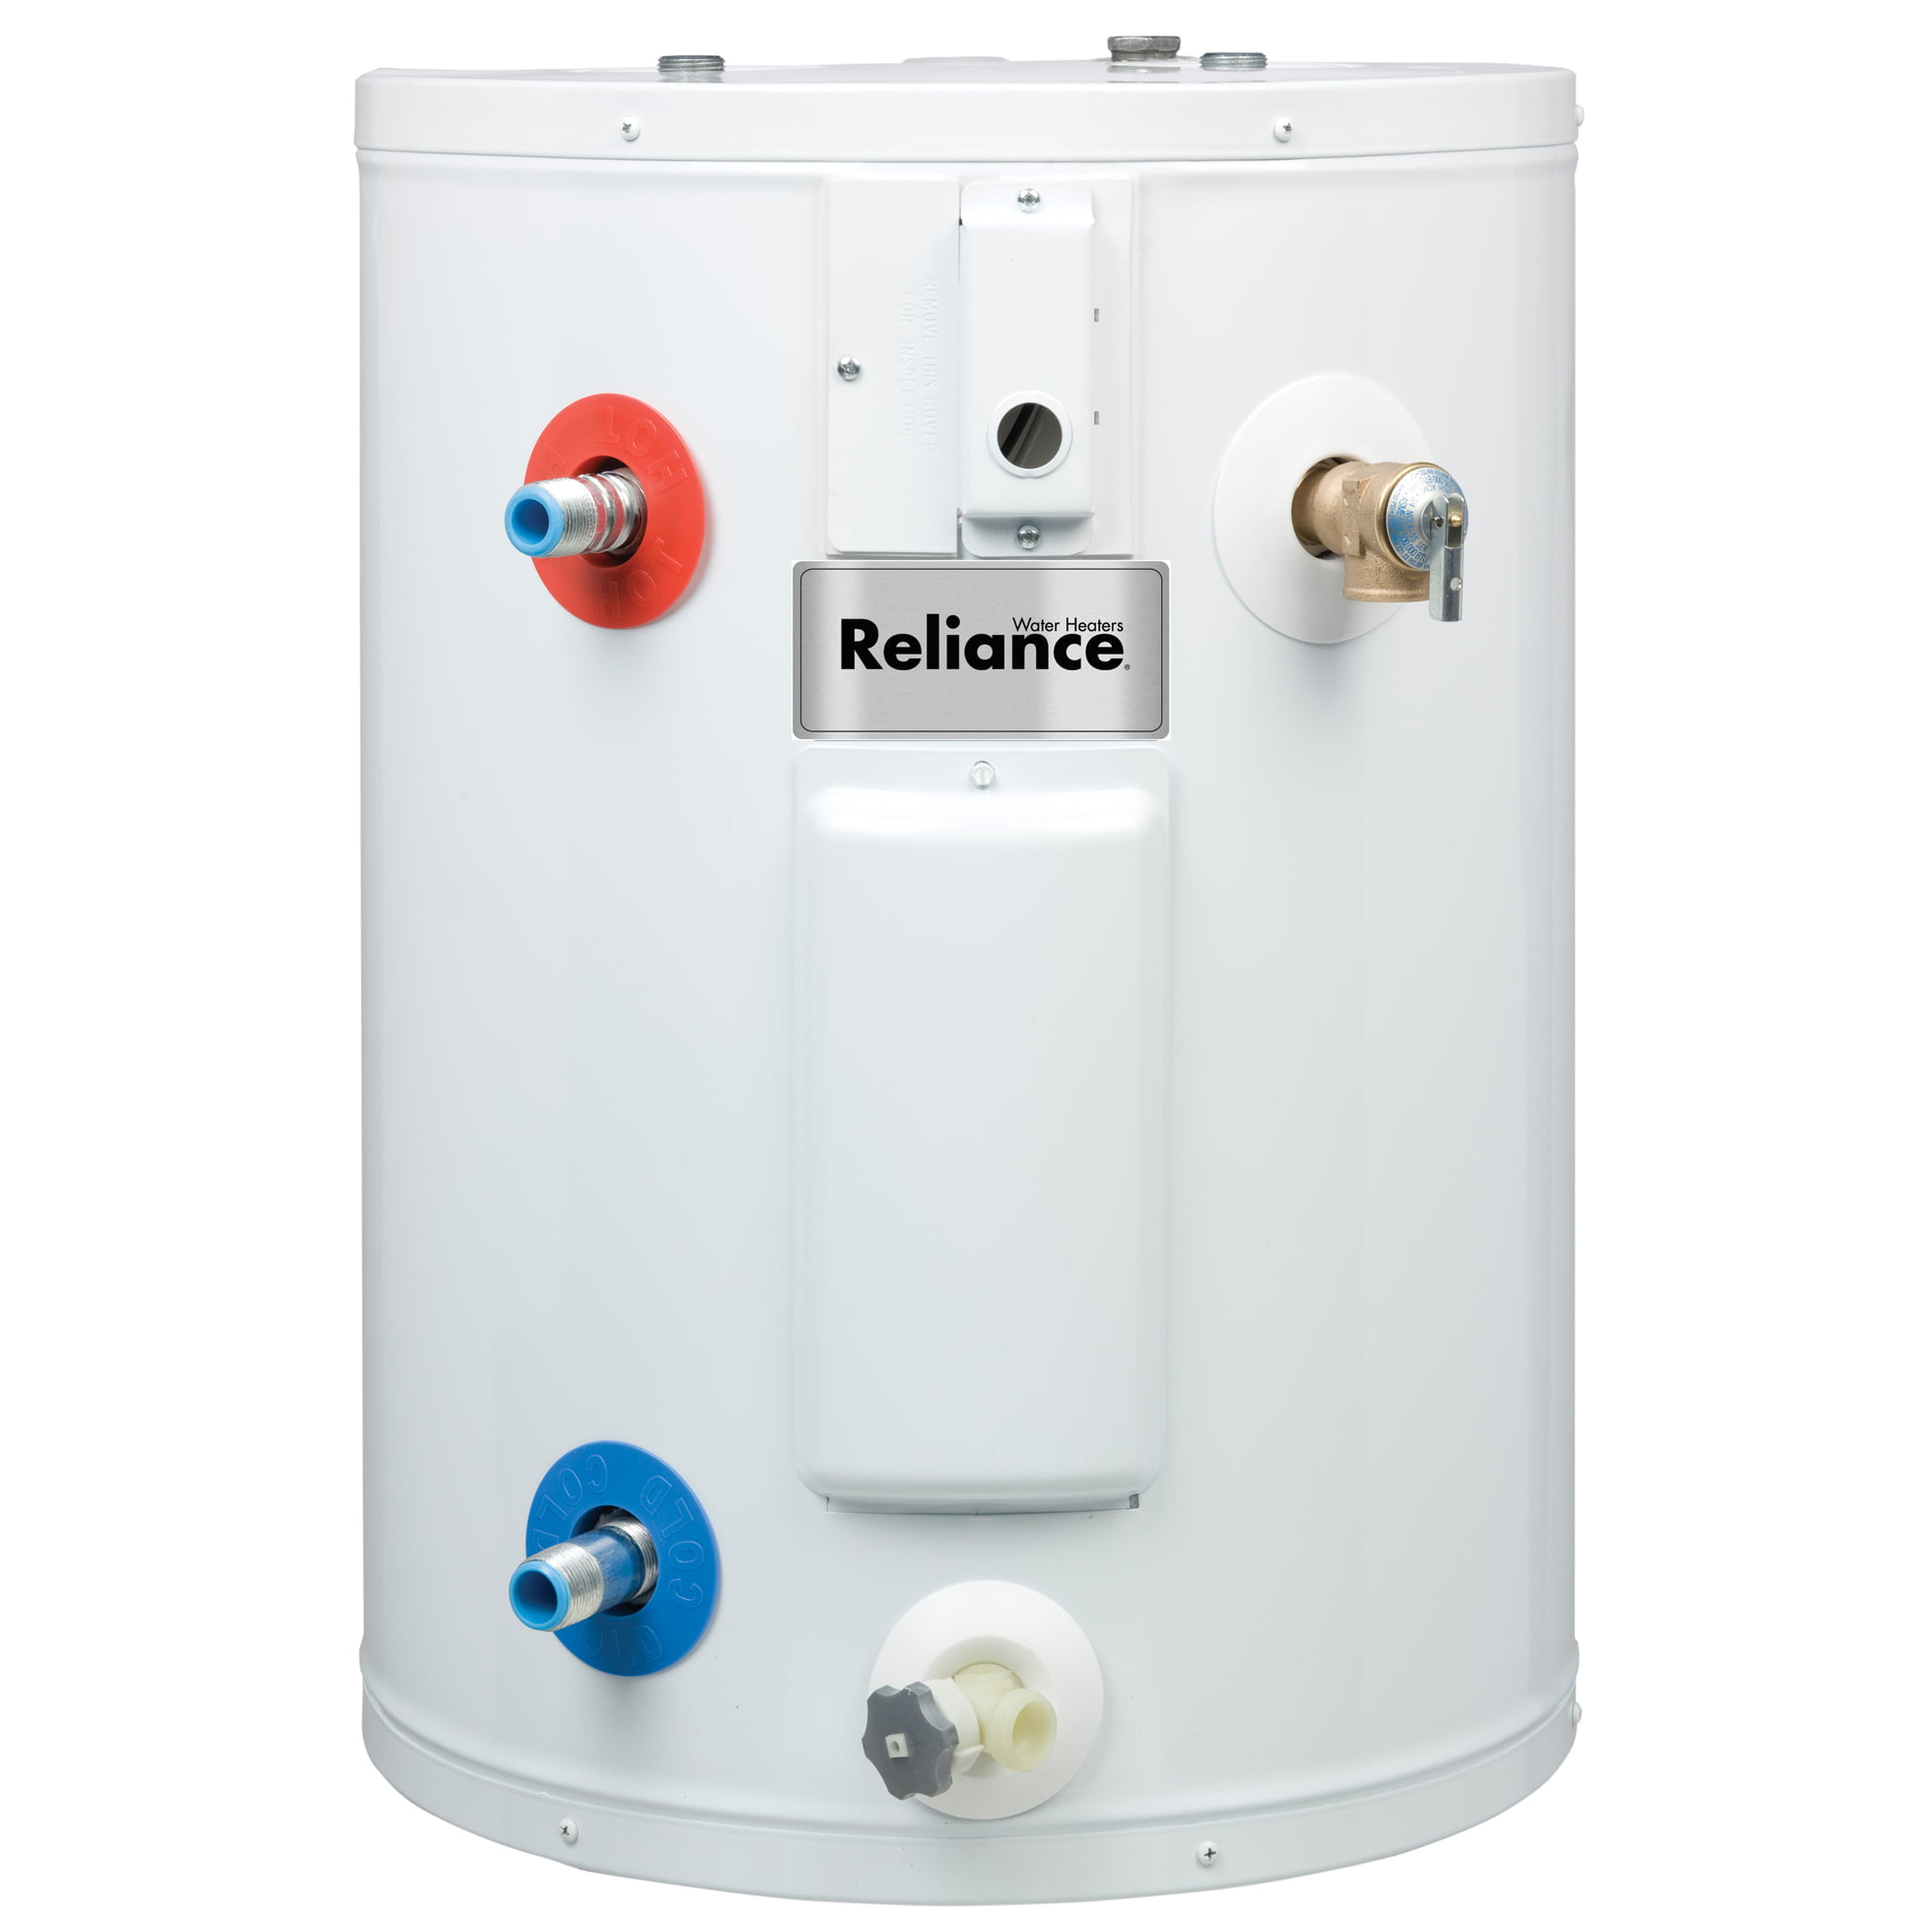 reliance-6-20-soms-k-20-gallon-compact-electric-water-heater-walmart